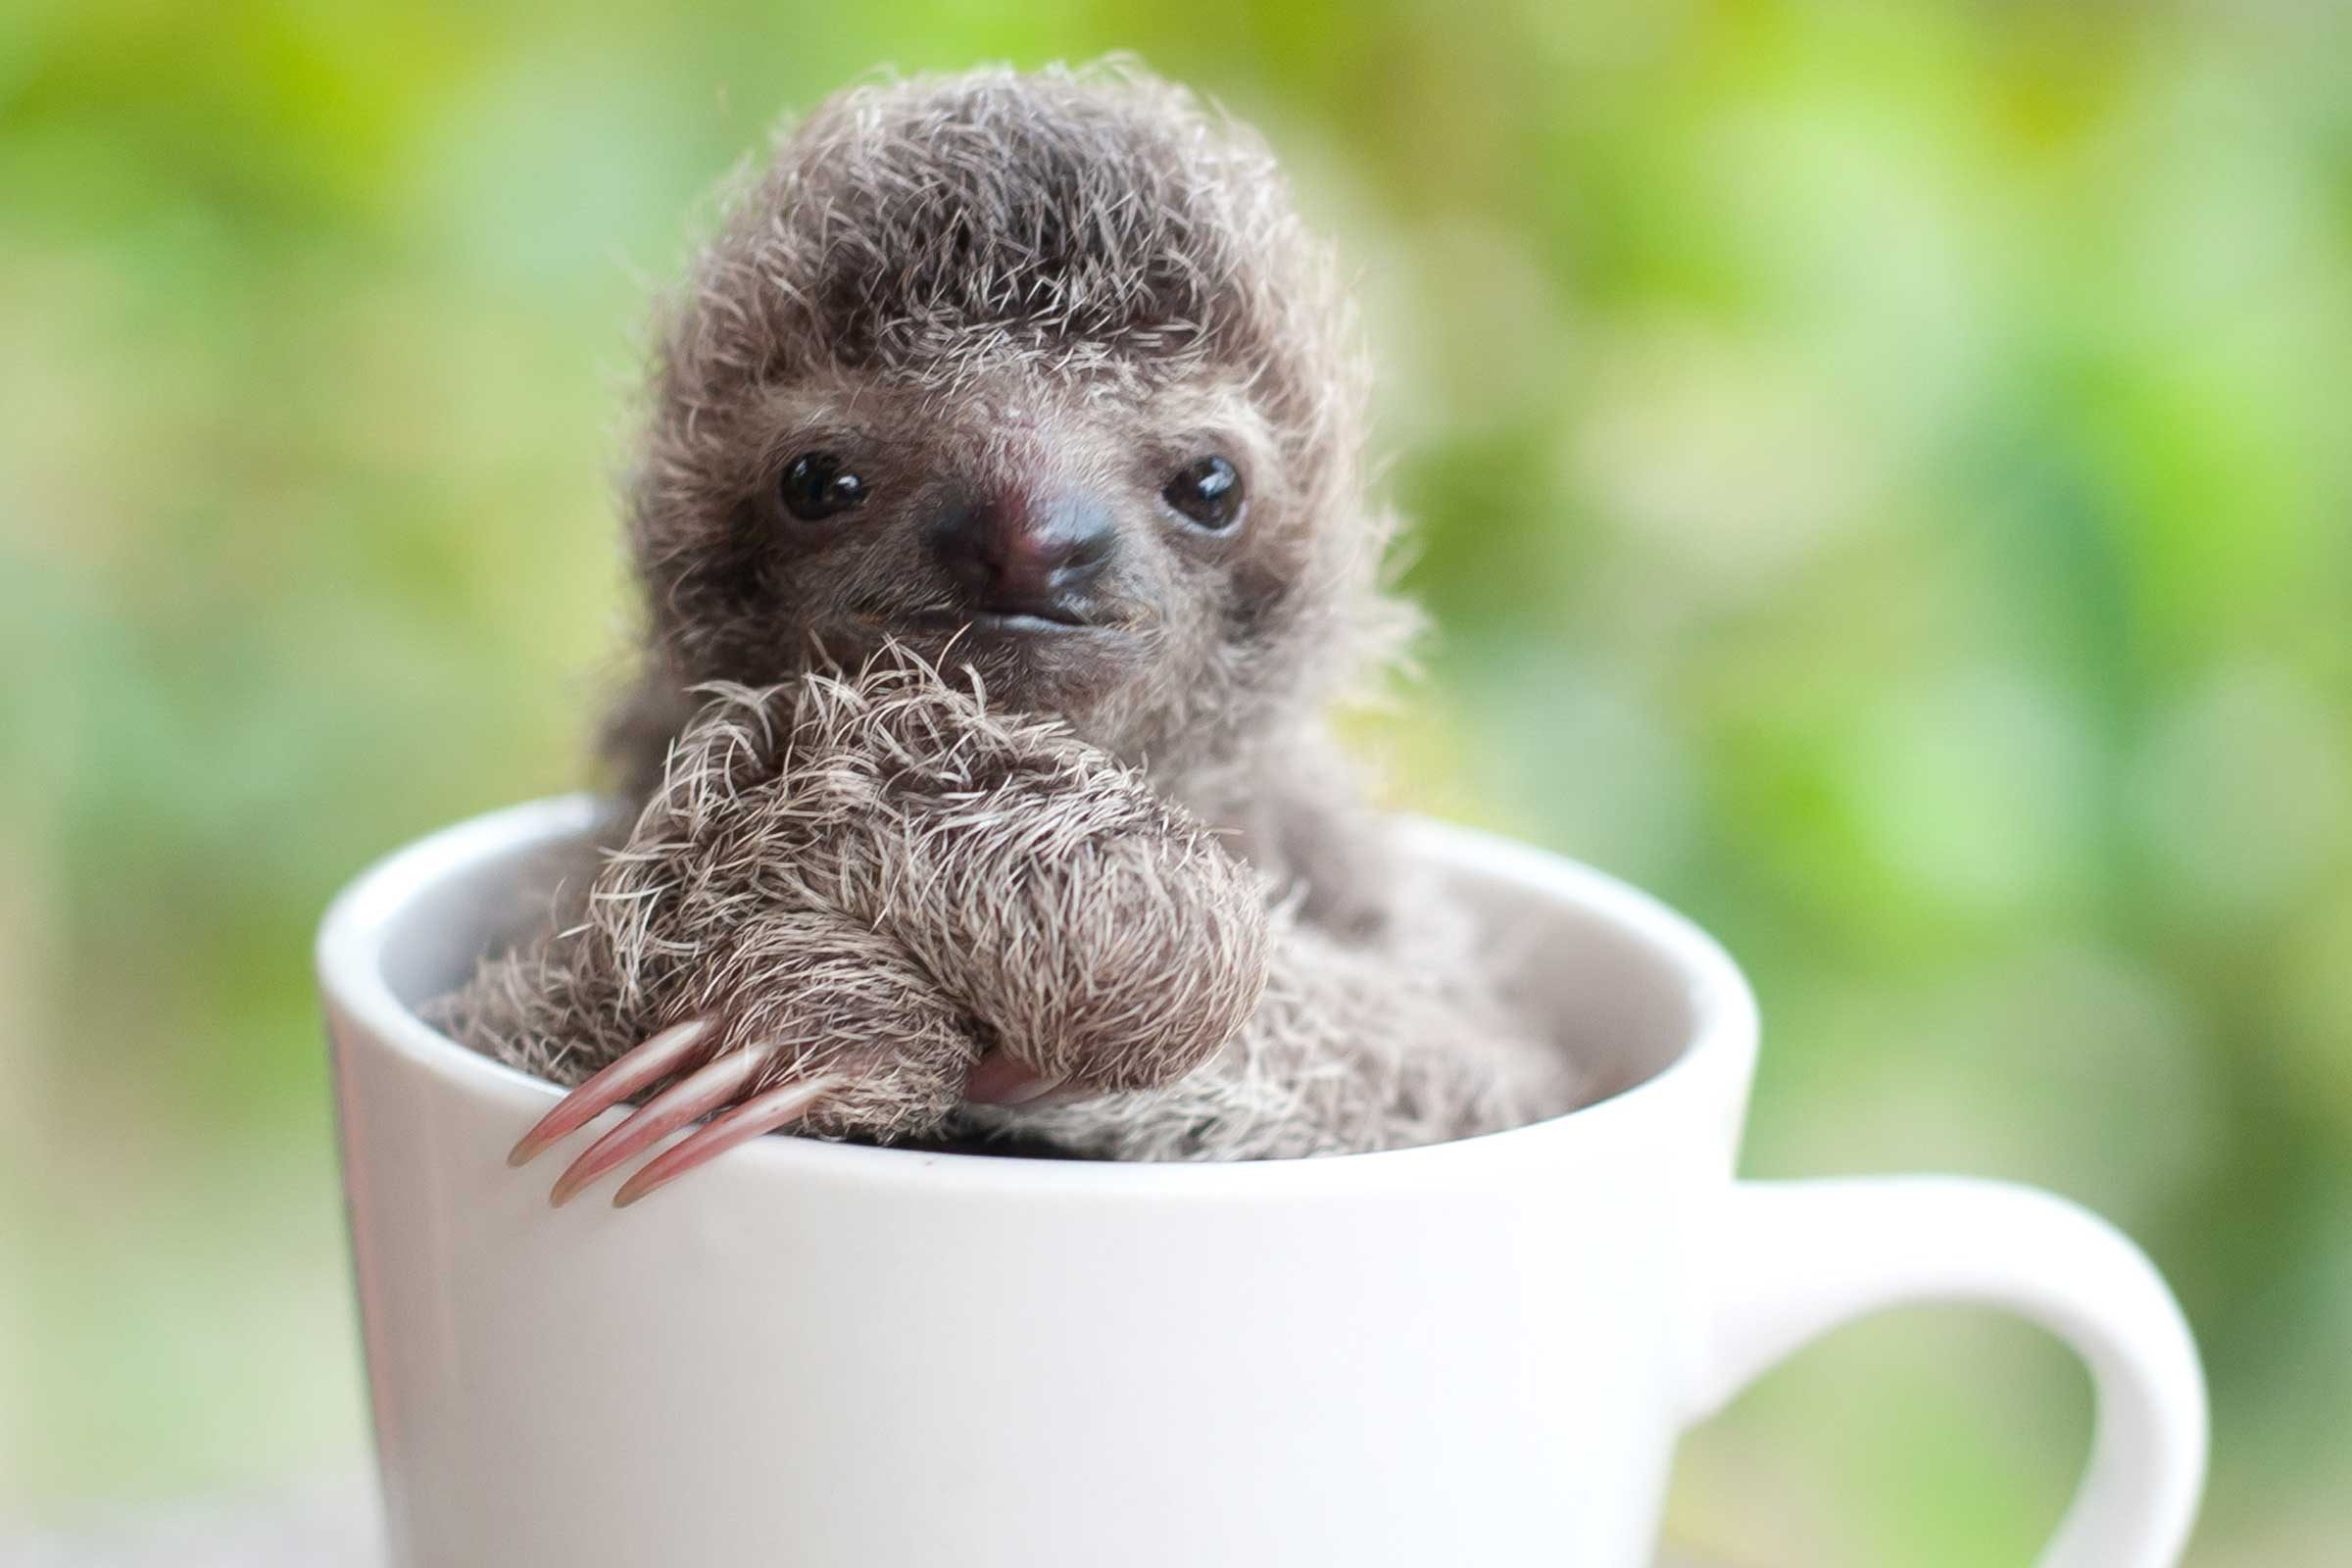 Adorable Sloth Pictures You Need in Your Life | Reader's Digest